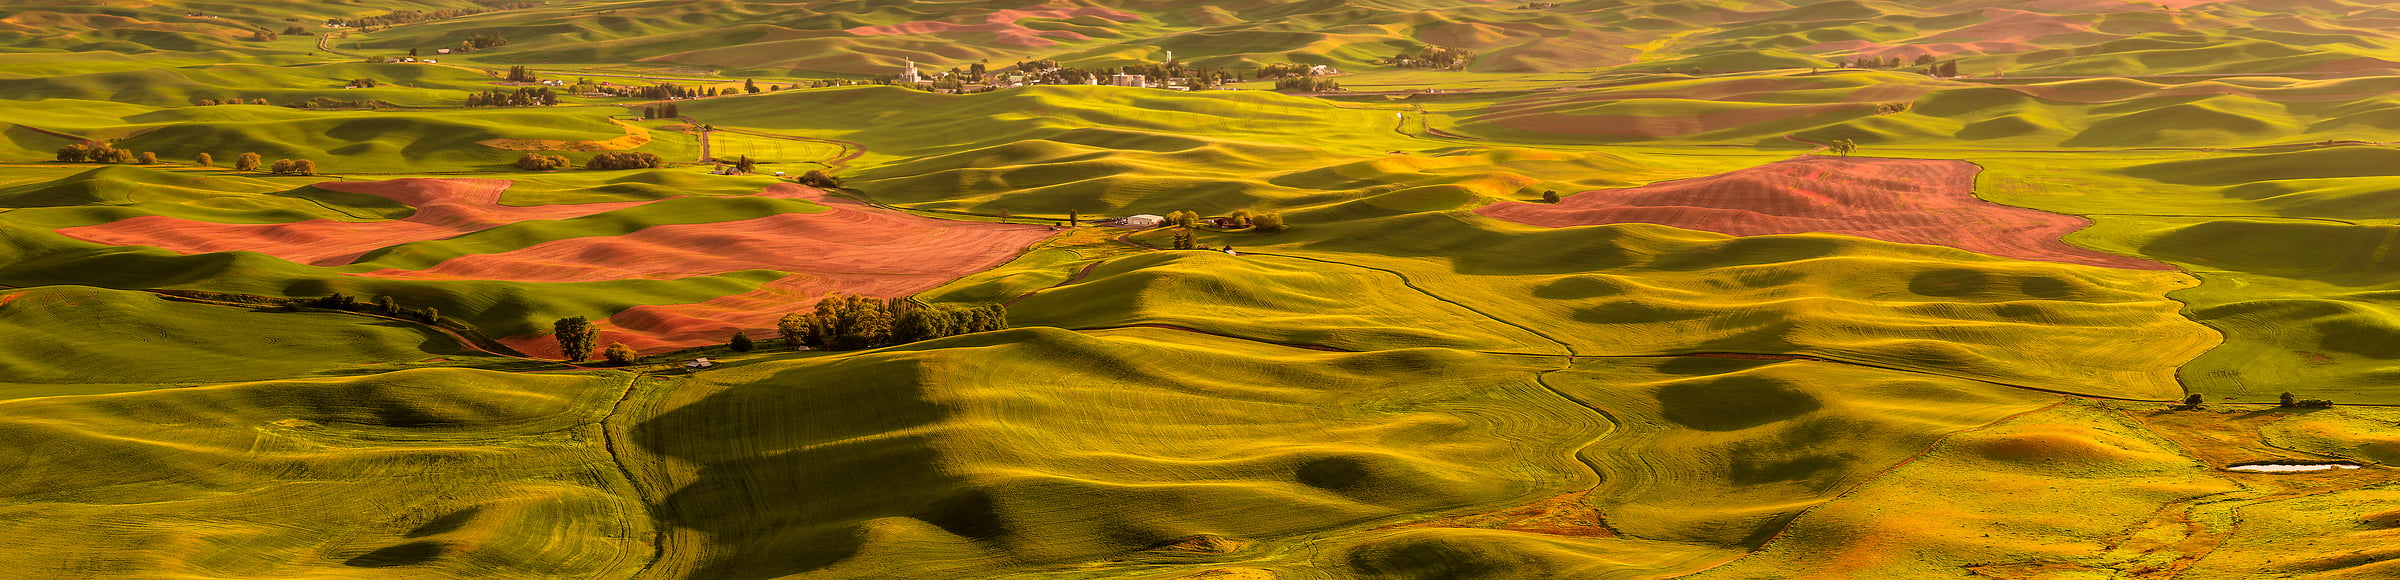 62 megapixels! A very high resolution, large-format VAST photo print of farms; landscape photograph created by Chris Collacott in Palouse, WA, USA.